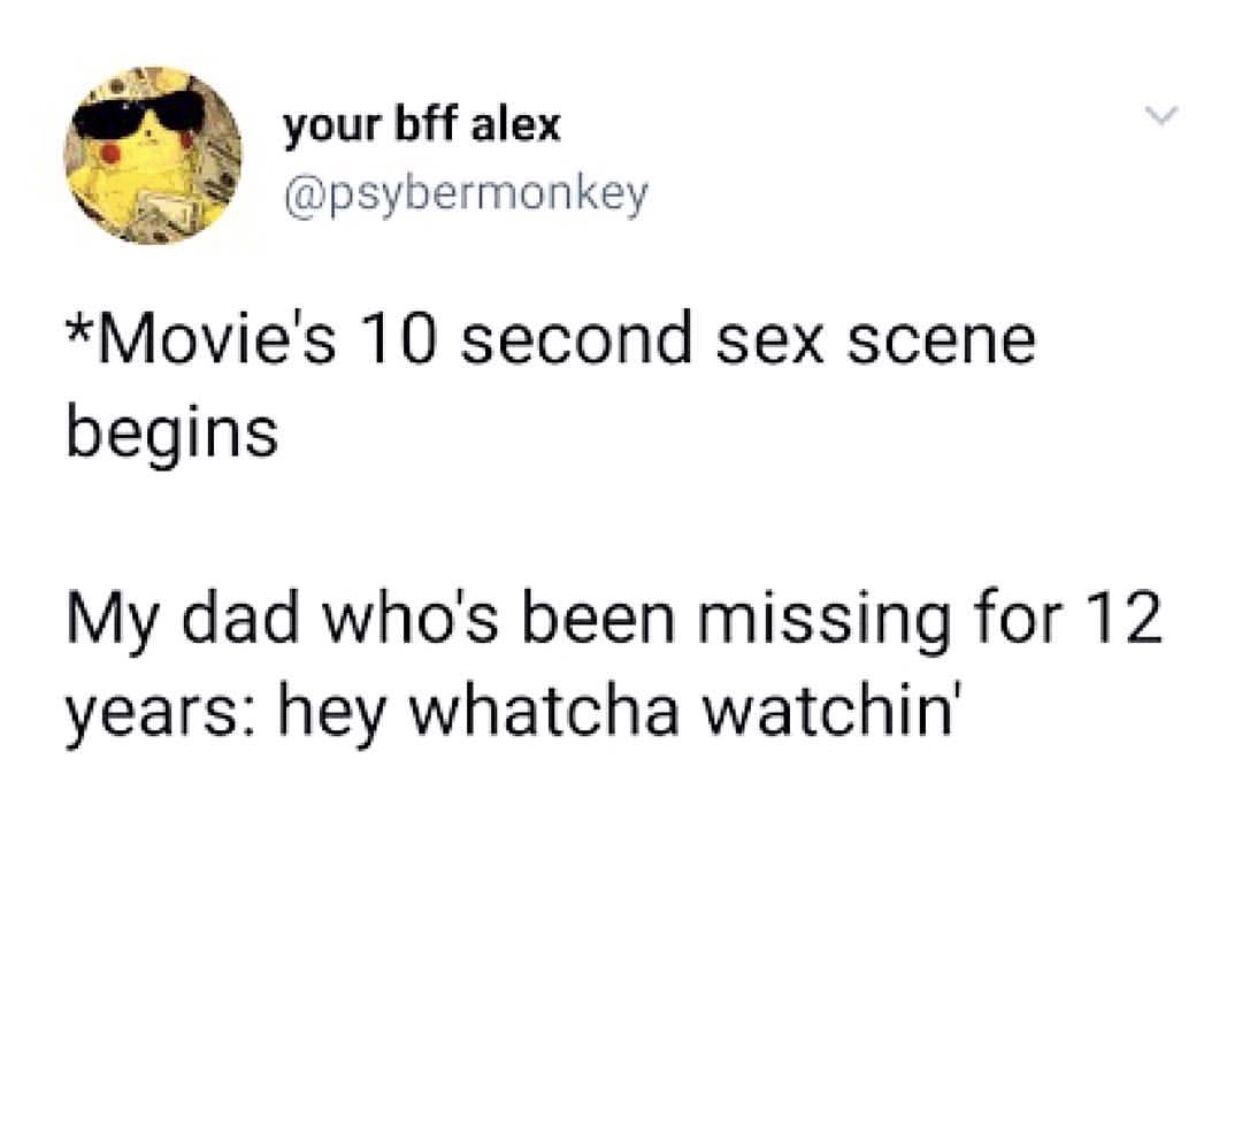 angle - your bff alex Movie's 10 second sex scene begins My dad who's been missing for 12 years hey whatcha watchin'